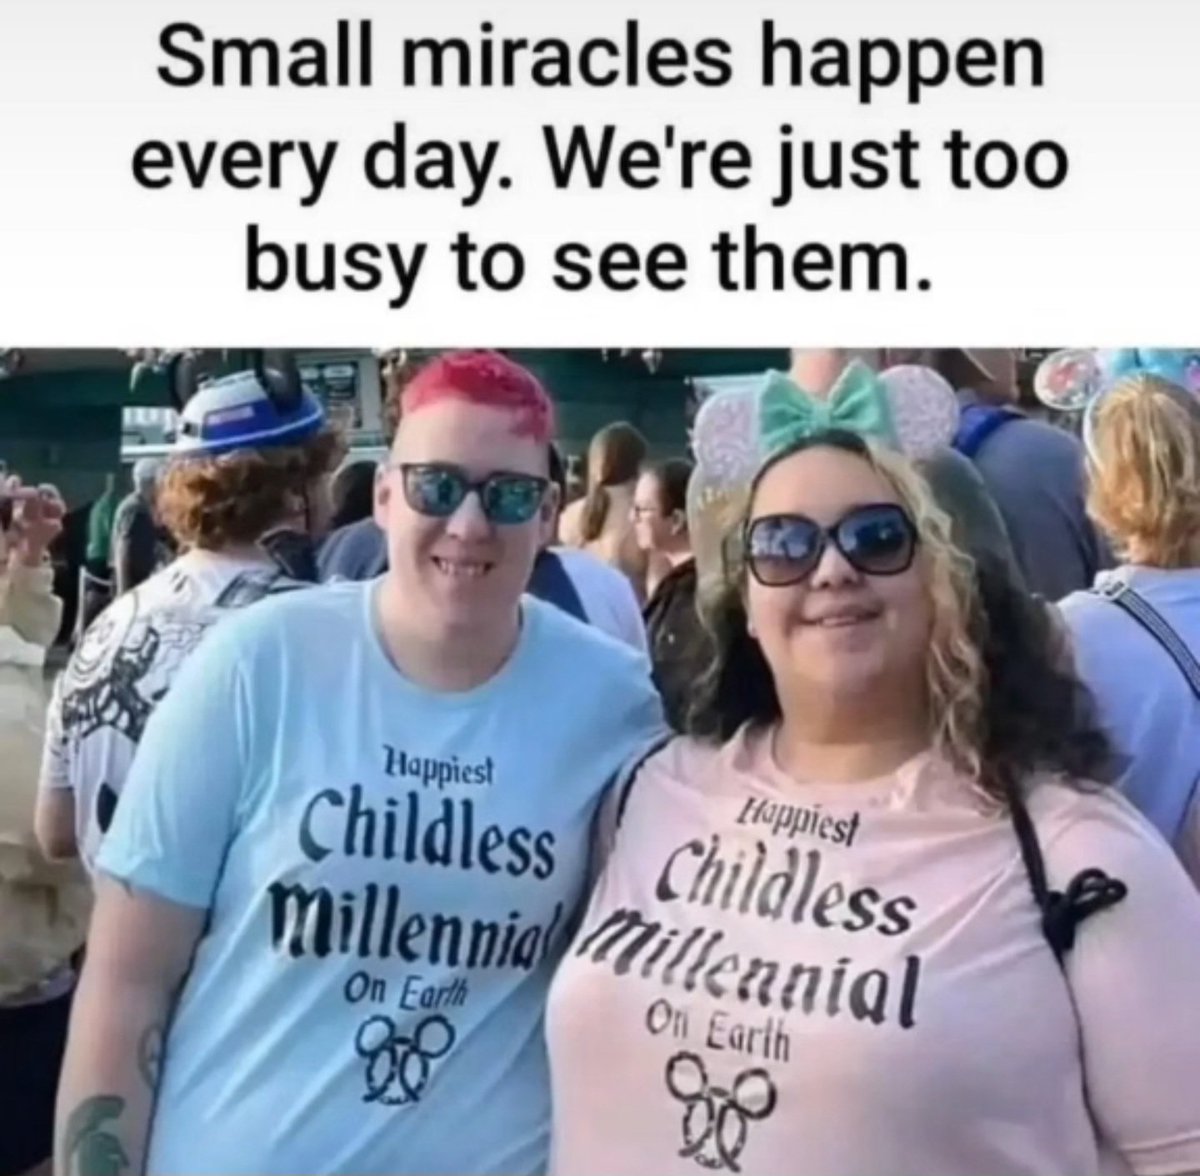 Selfish, fat bitches, get on my nerves! Your Daddy should have worn a condom! Yours truly, Happiest GenX Badass Mom!
#Christmas #MerryChristmas #LiberalismIsAMentalDisease #karens  #whiteliberallunatics #Israel #miracles #useacondom